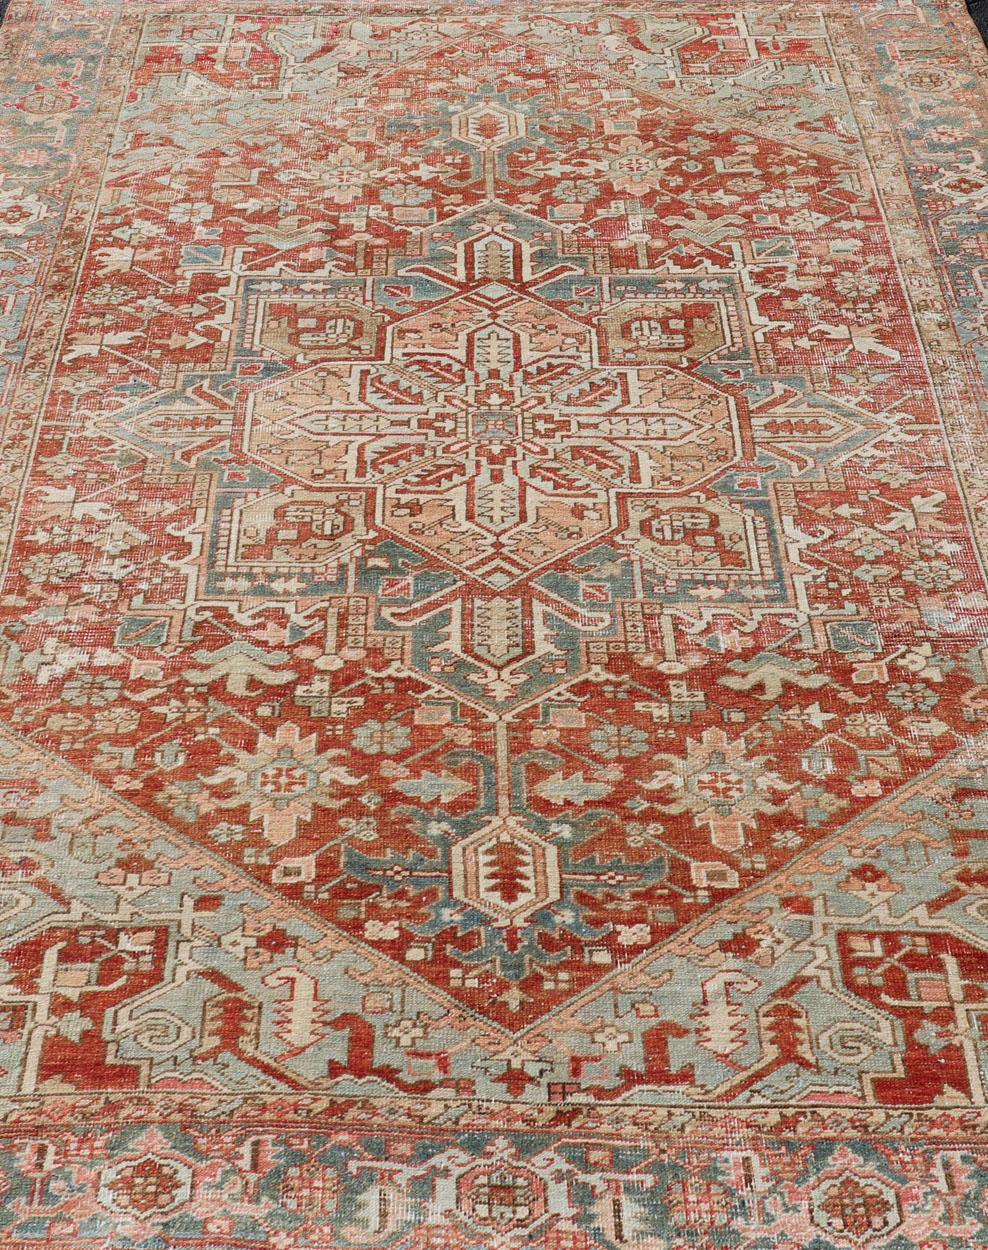 Antique Heriz Rug with All-Over Medallion Design in Red, Blue, Pink, Tan & Brown In Good Condition For Sale In Atlanta, GA